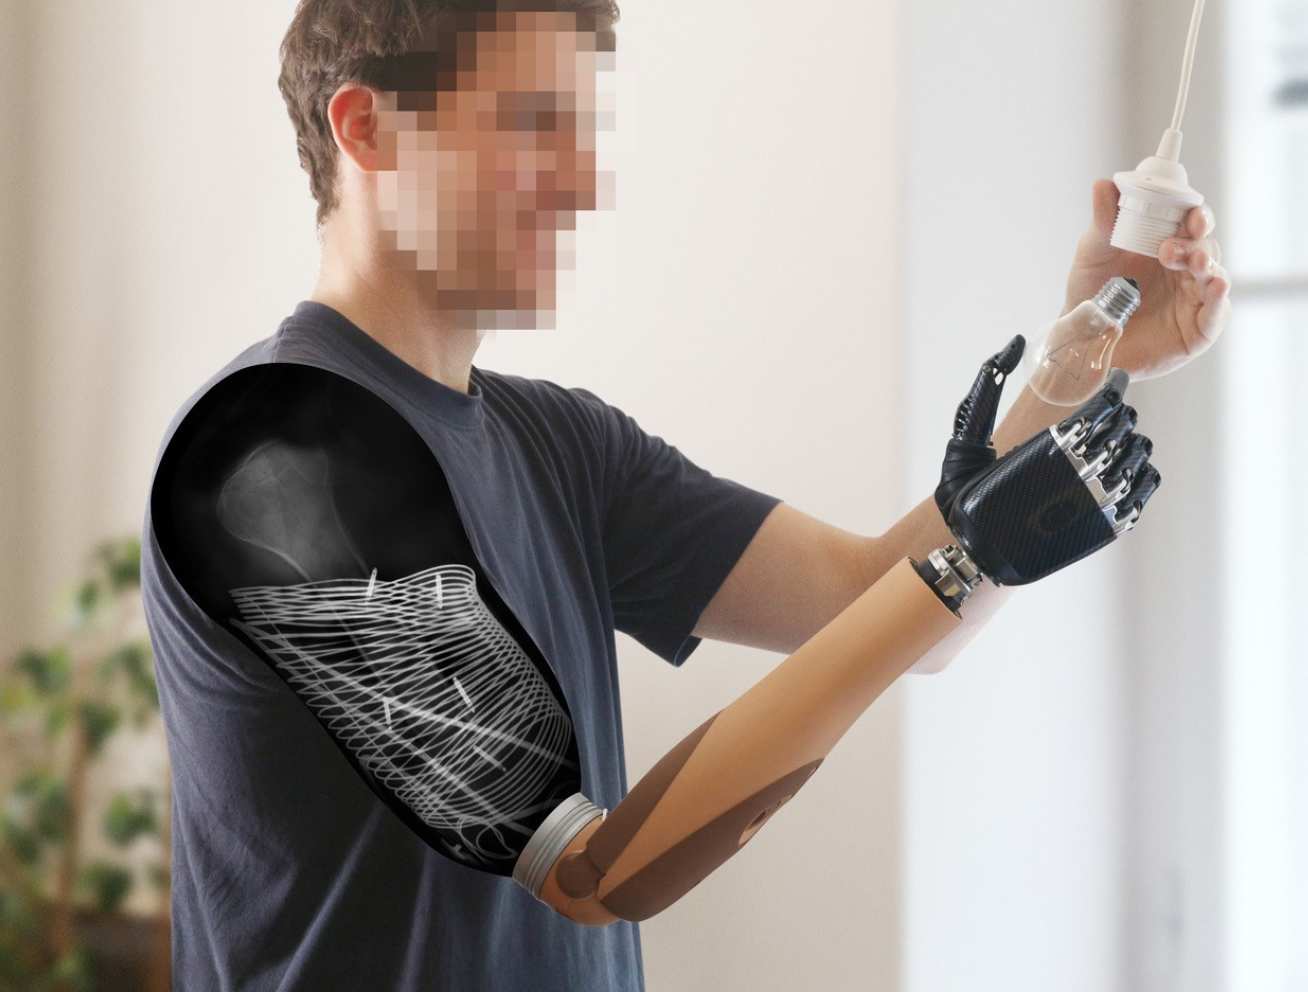 Photo of amputee using his prosthetic to fit a lightbulb. A cut-out shows the inner workings of the electrodes and nerve reinnervation